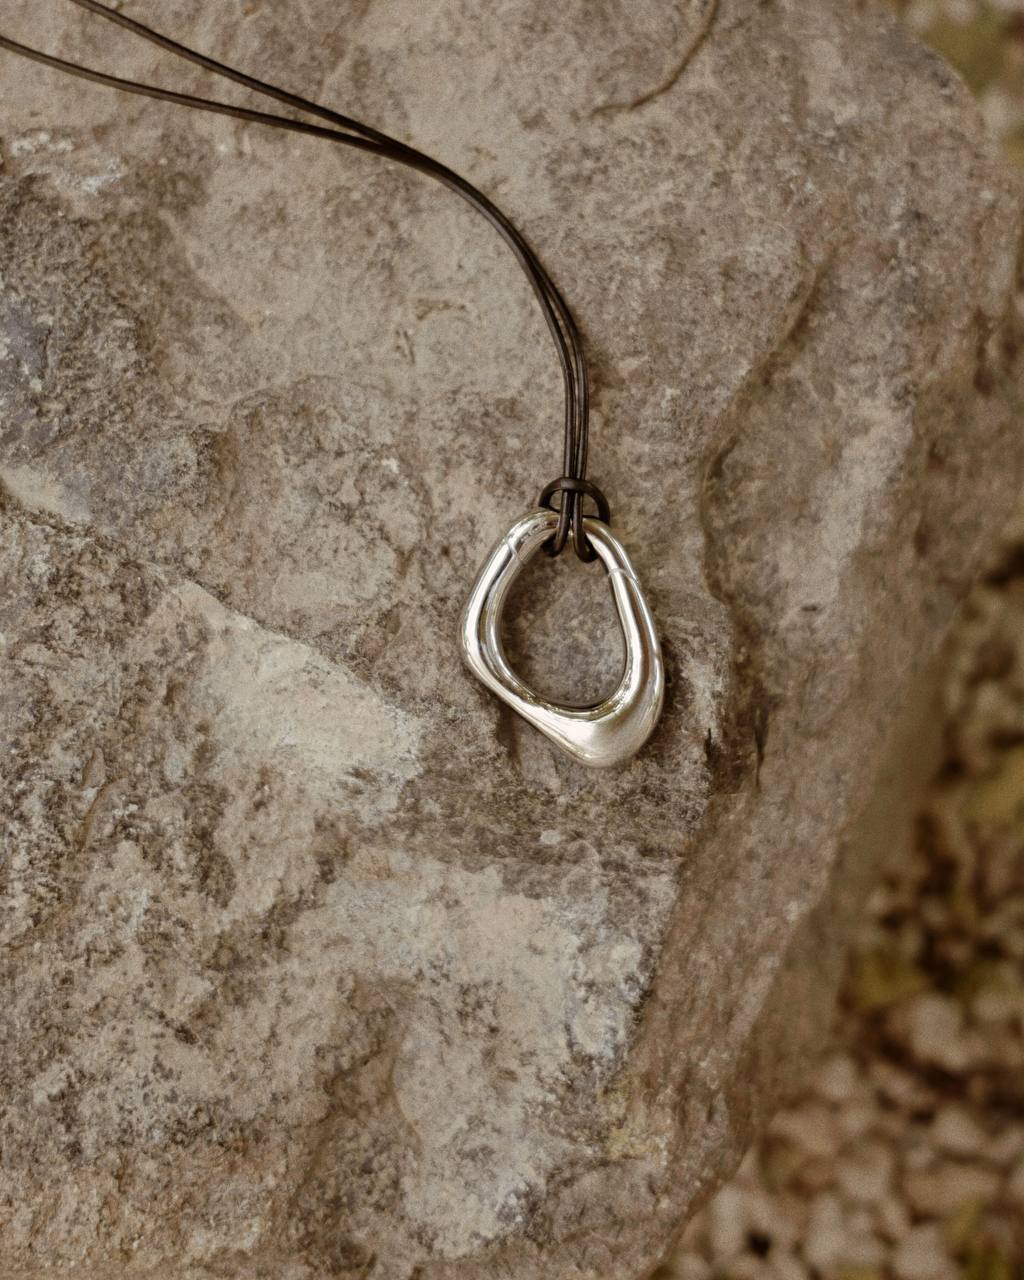 Close-up of the Momentum Necklace by Enso Design Lab, designed by Ani Han, resting on a stone surface. The pendant's silver finish and fluid form are highlighted.